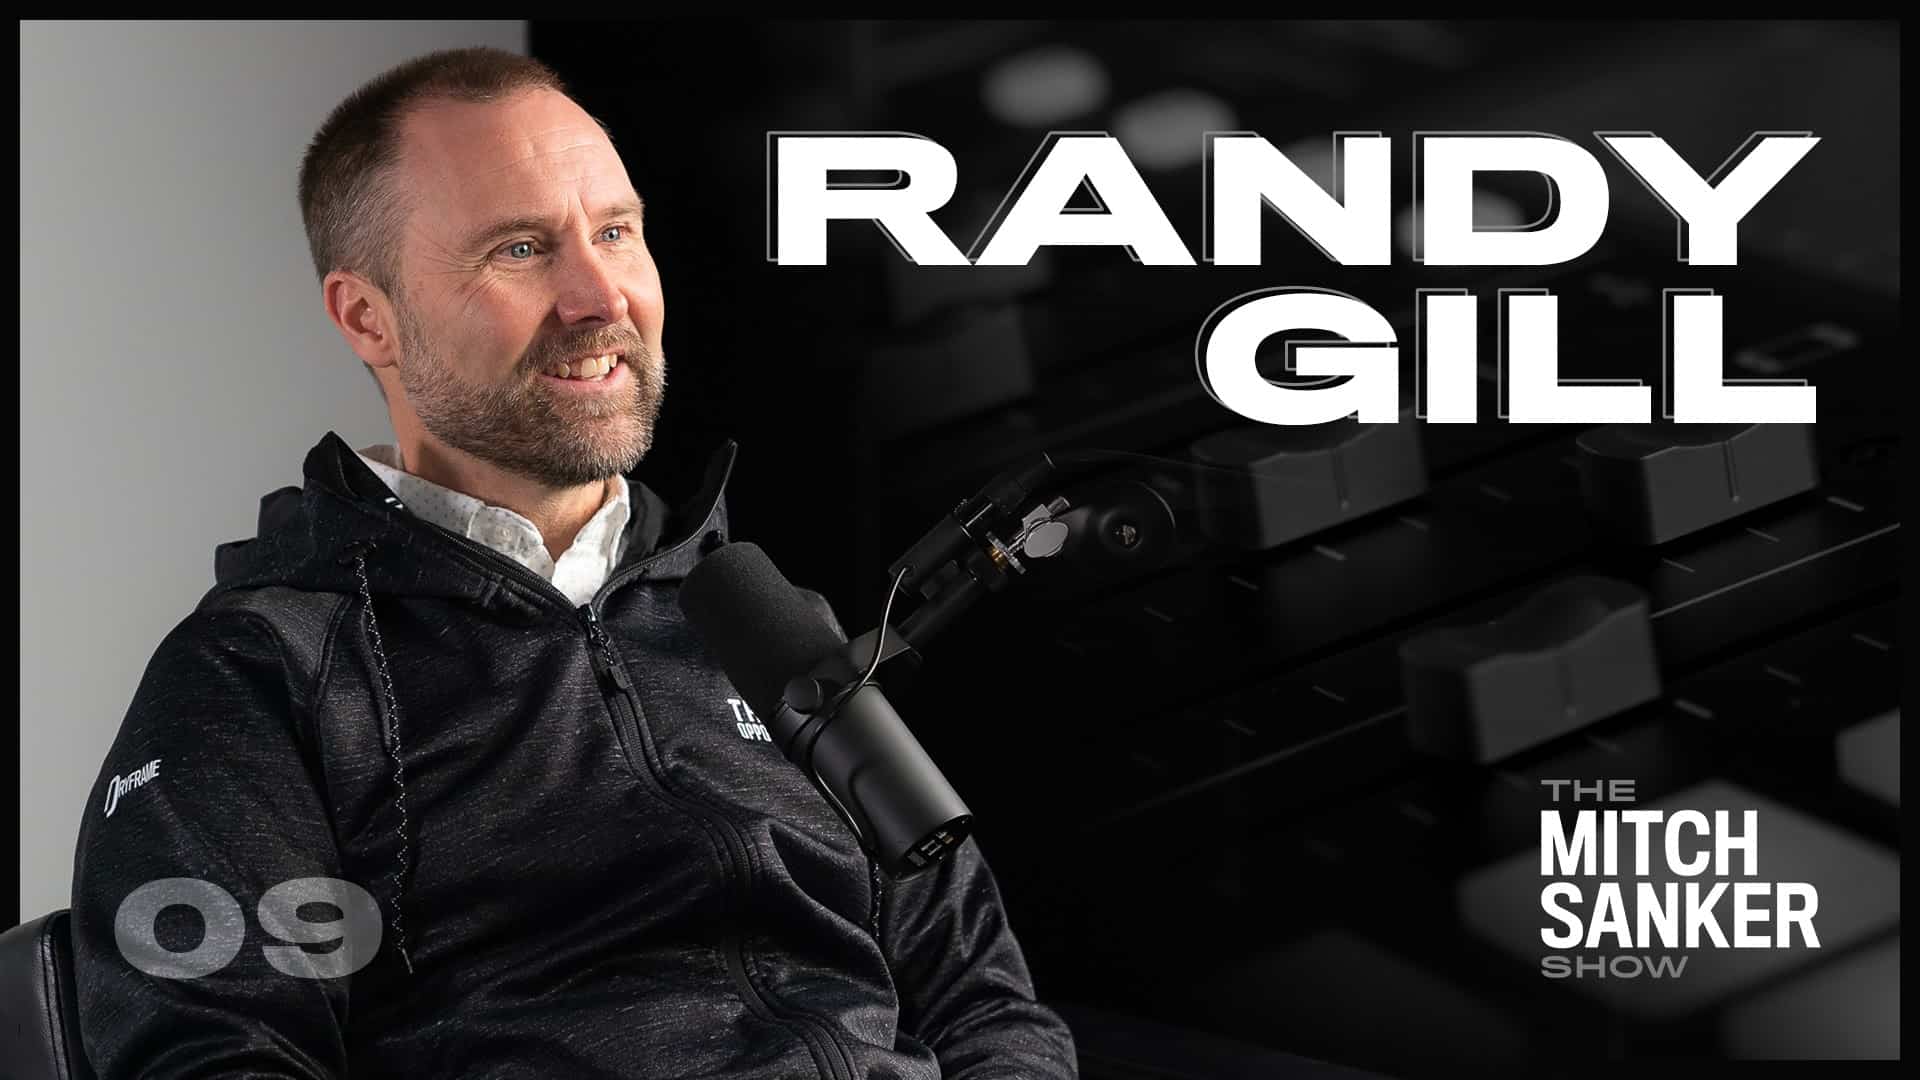 You are currently viewing The Mitch Sanker Show – Episode 09 featuring Randy Gill